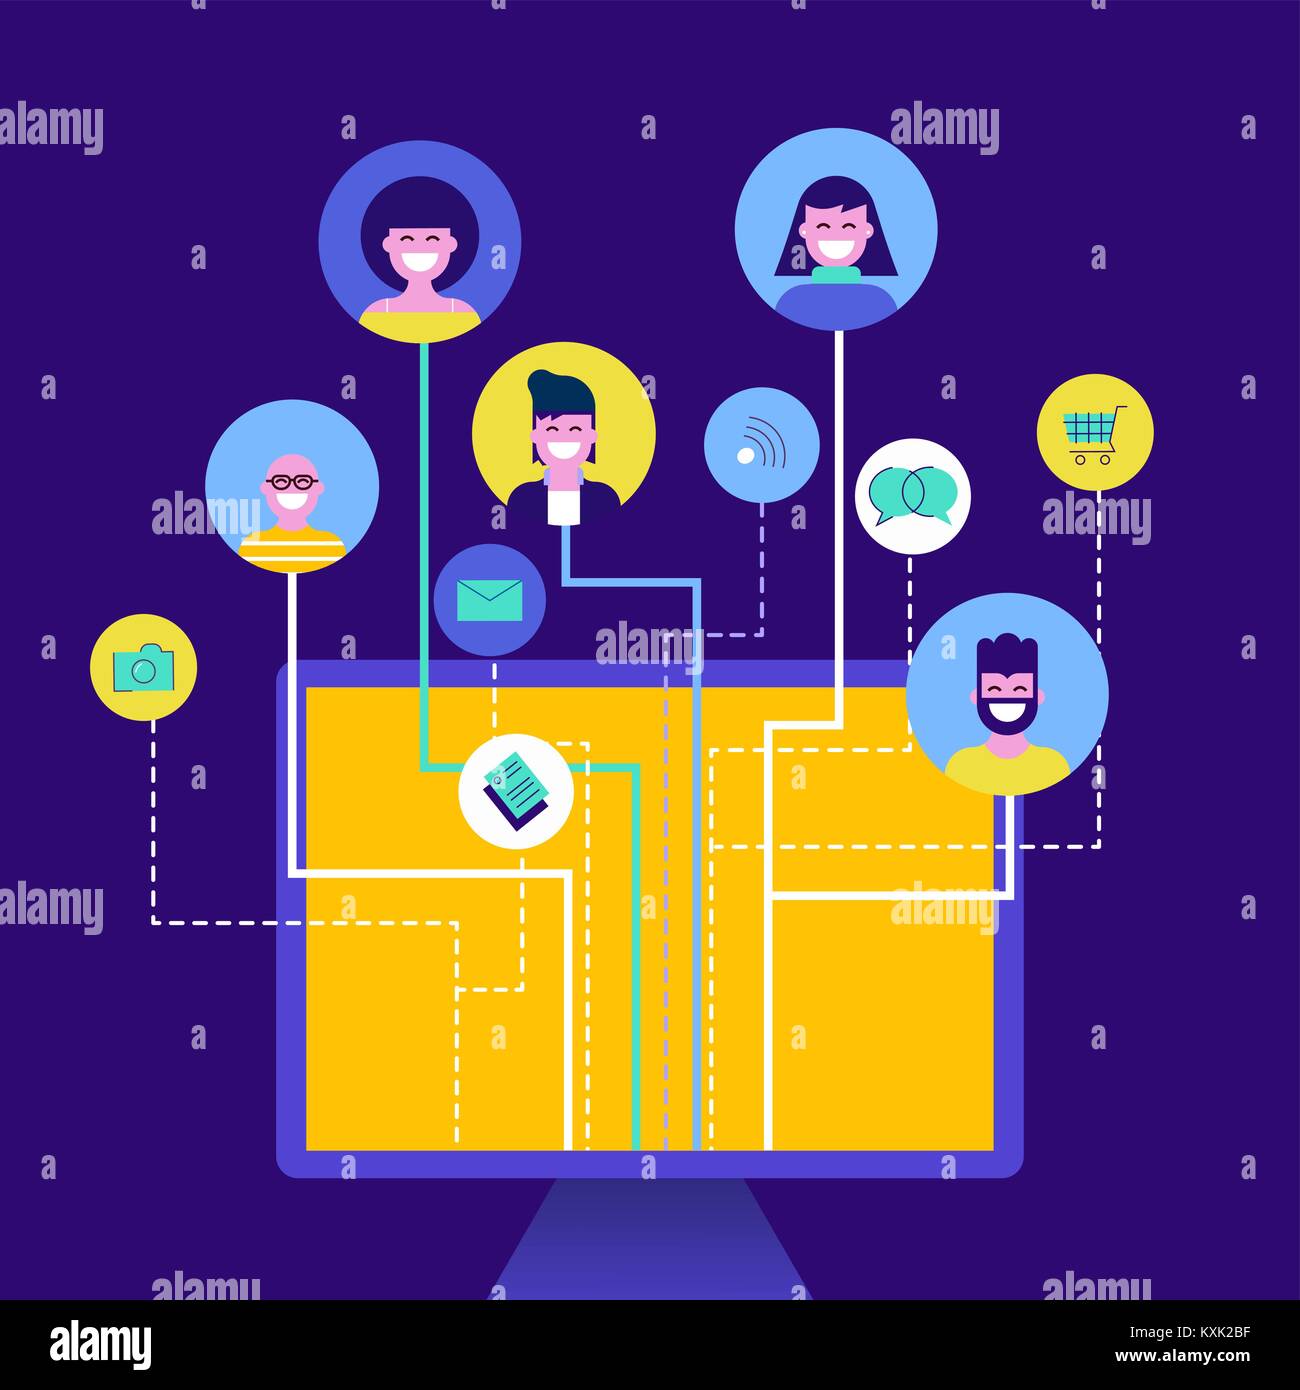 Computer connected to online social media network activities and people team. Includes shopping, photo, mail, message icon. EPS10 vector. Stock Vector